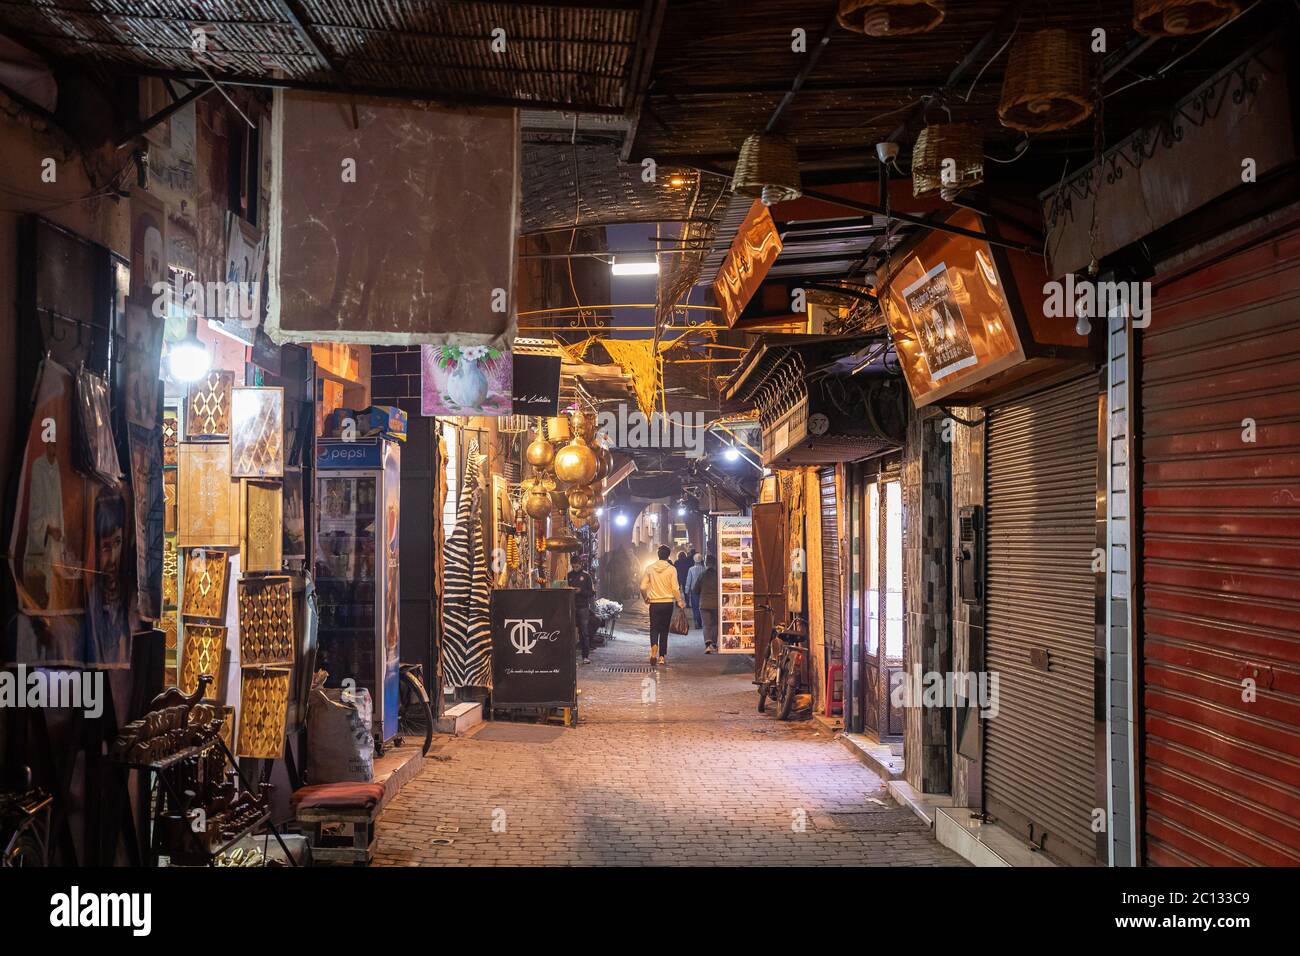 Streets, souks and shops inside the medina in Marrakesh (Marrakech), Morocco, Africa at night Stock Photo